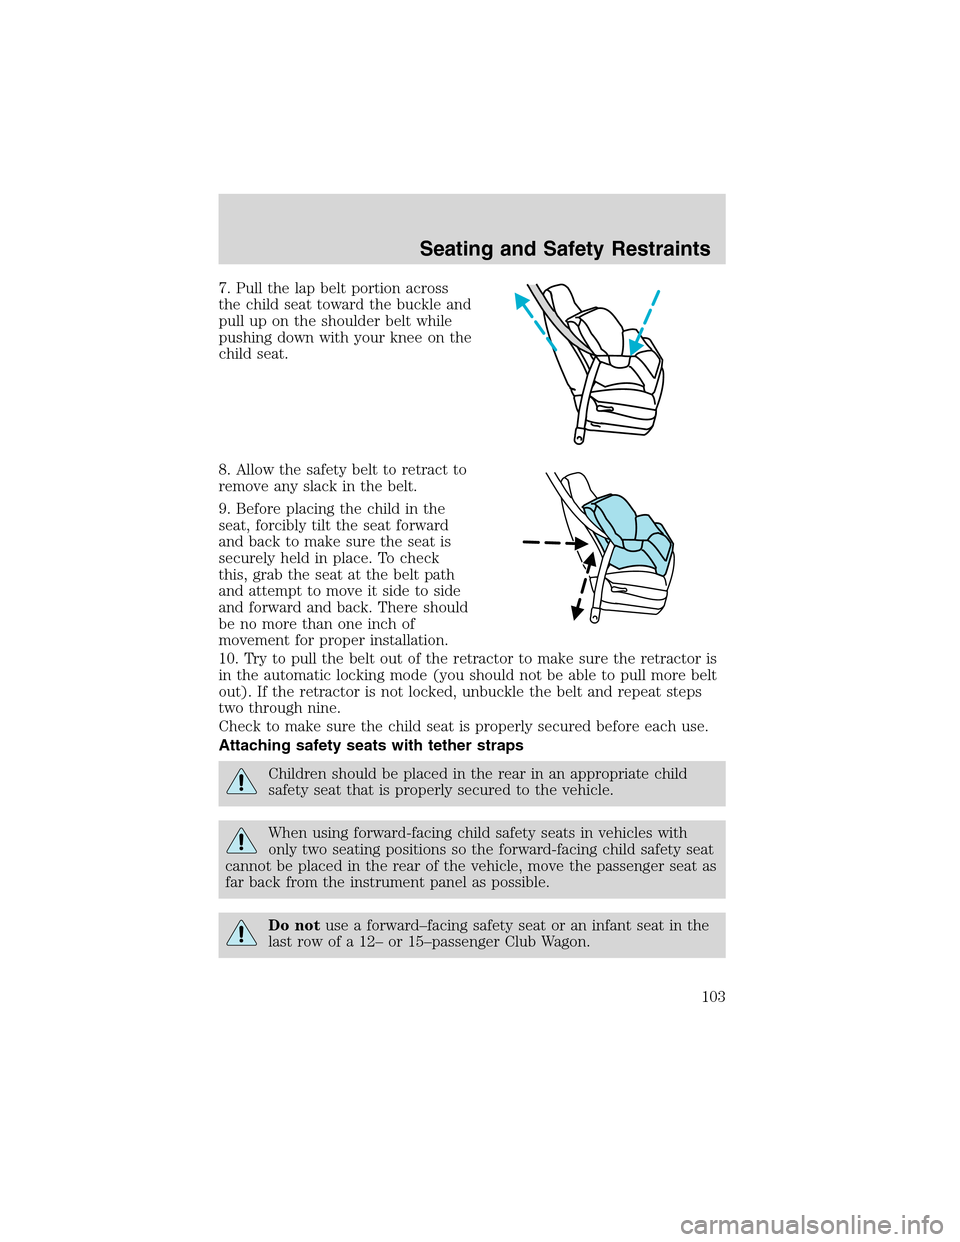 FORD E SERIES 2003 4.G Owners Manual 7. Pull the lap belt portion across
the child seat toward the buckle and
pull up on the shoulder belt while
pushing down with your knee on the
child seat.
8. Allow the safety belt to retract to
remove